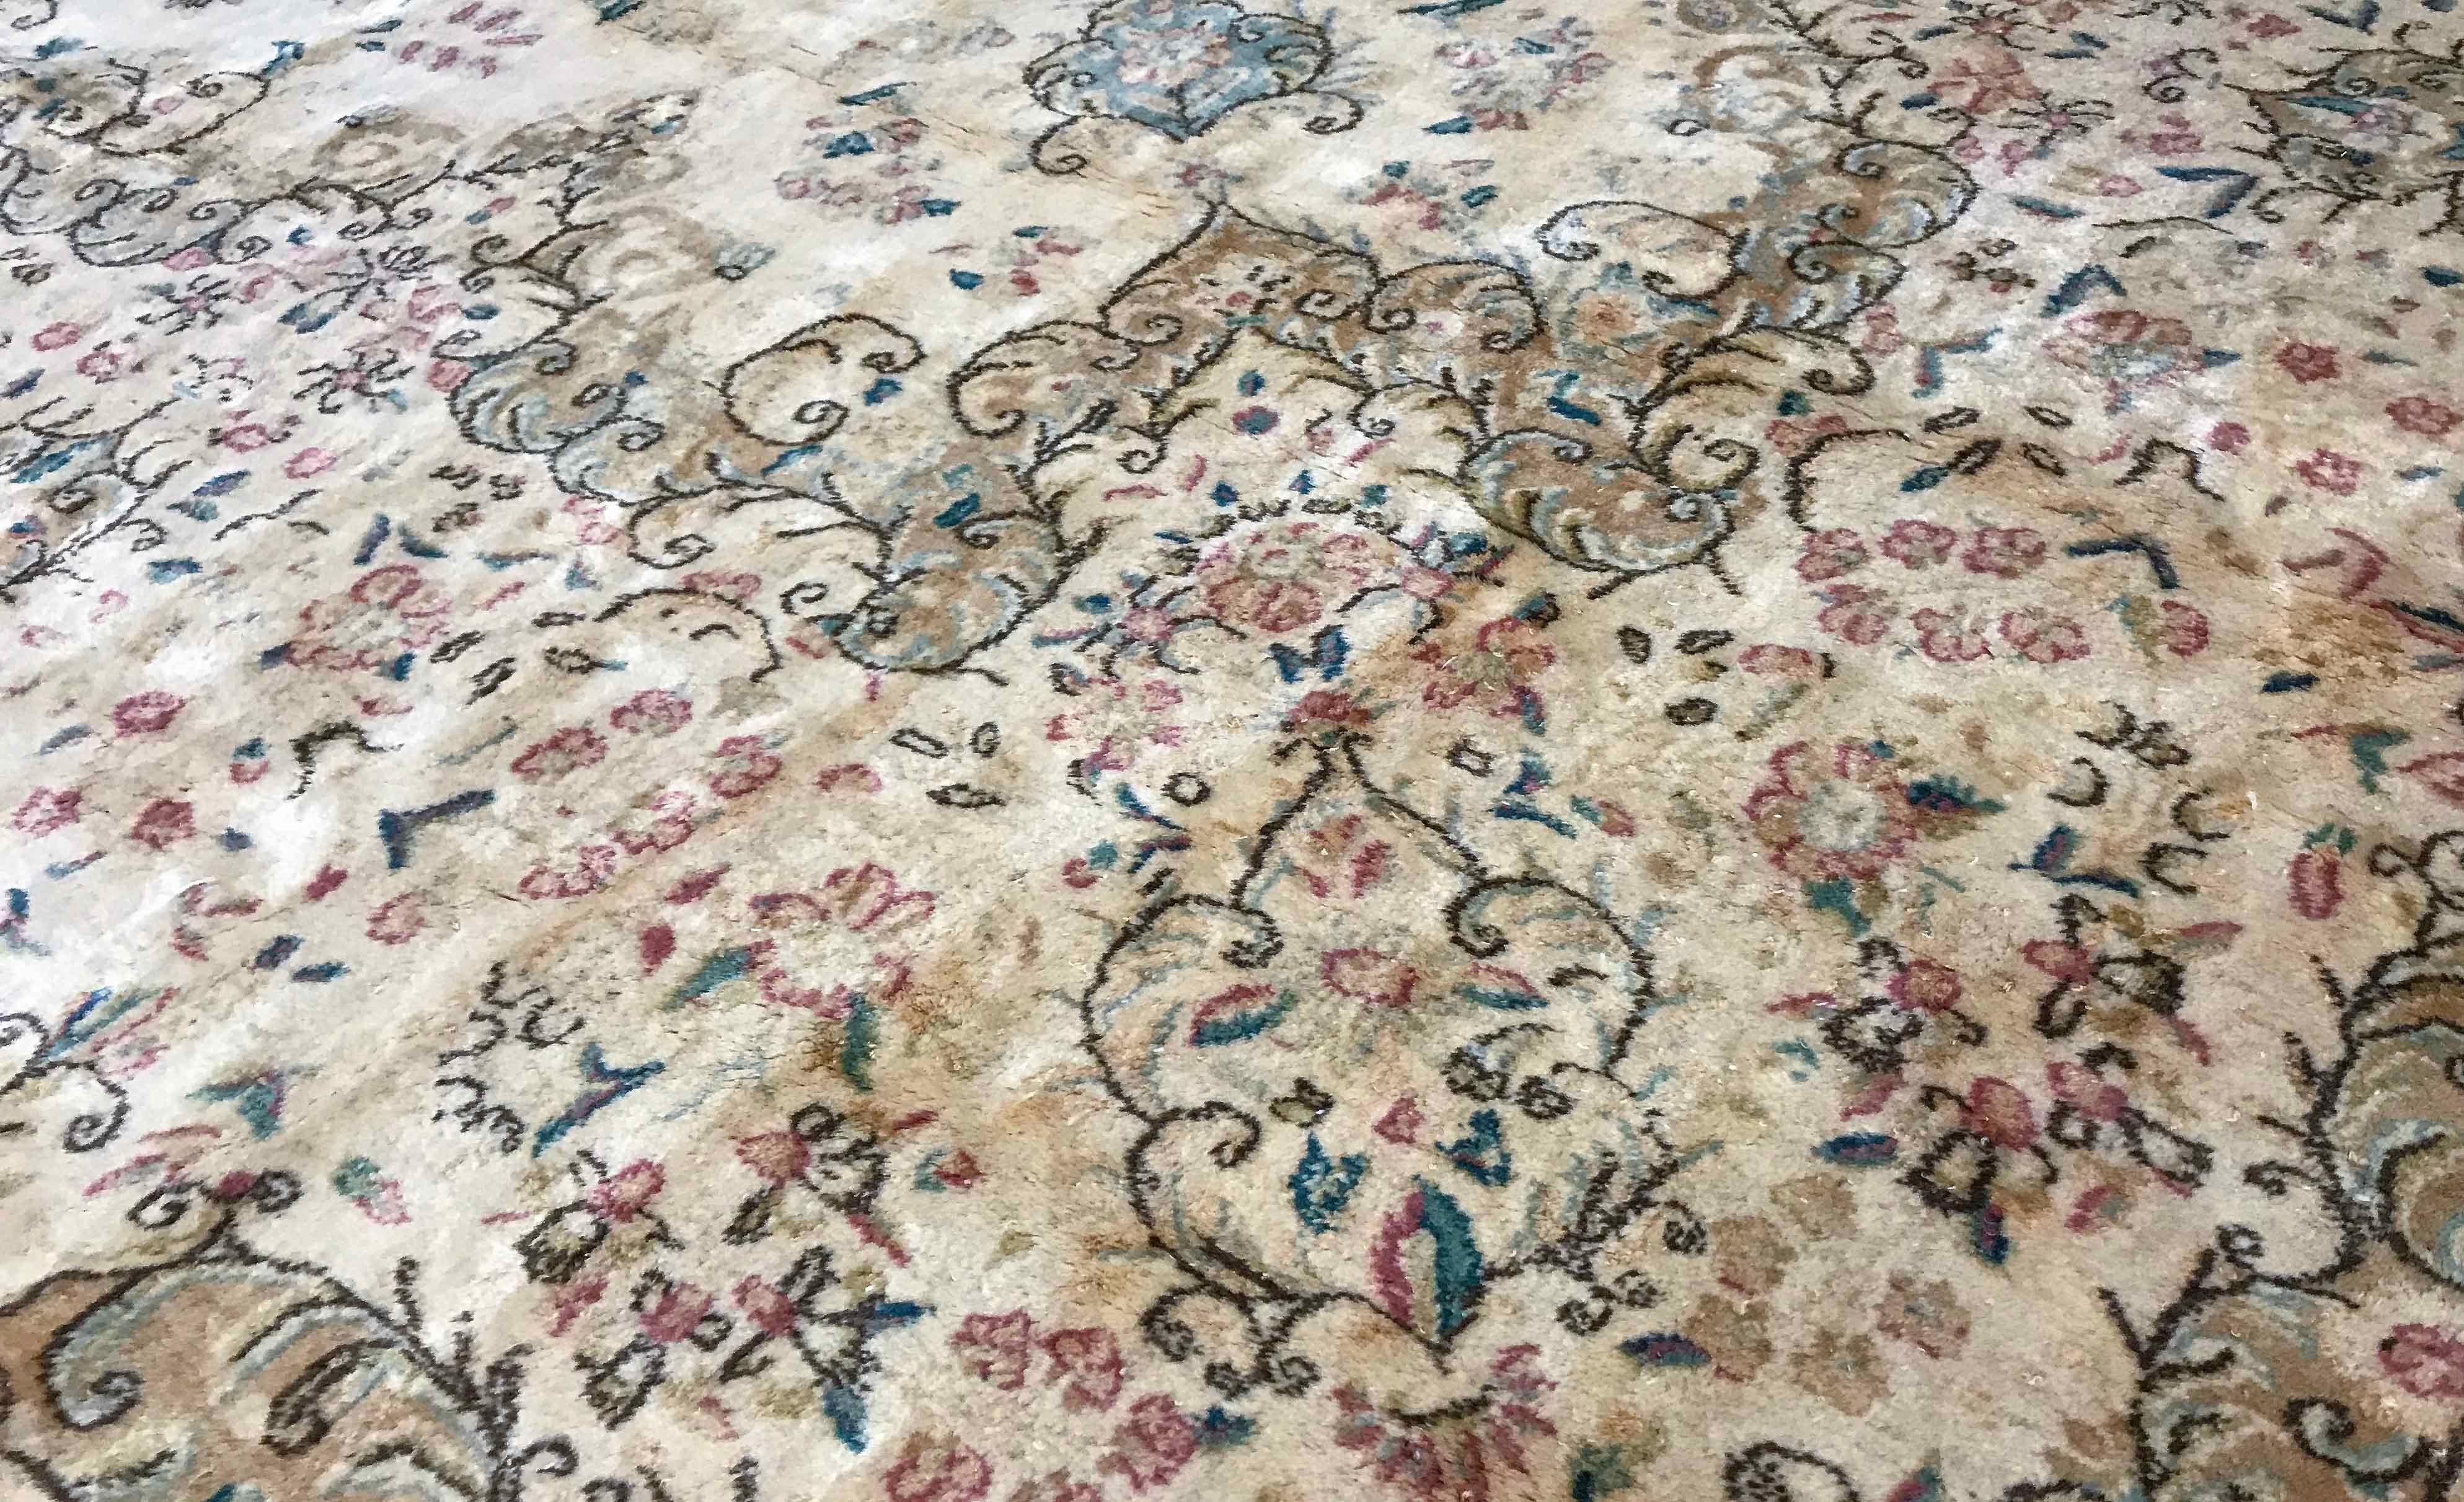 Vintage Persian Kerman rug, circa 1940. A soft and gentle design on an ivory field which blends into the border to create this large handwoven Kerman rug from Persia. Size: 11'5 x 20'11.